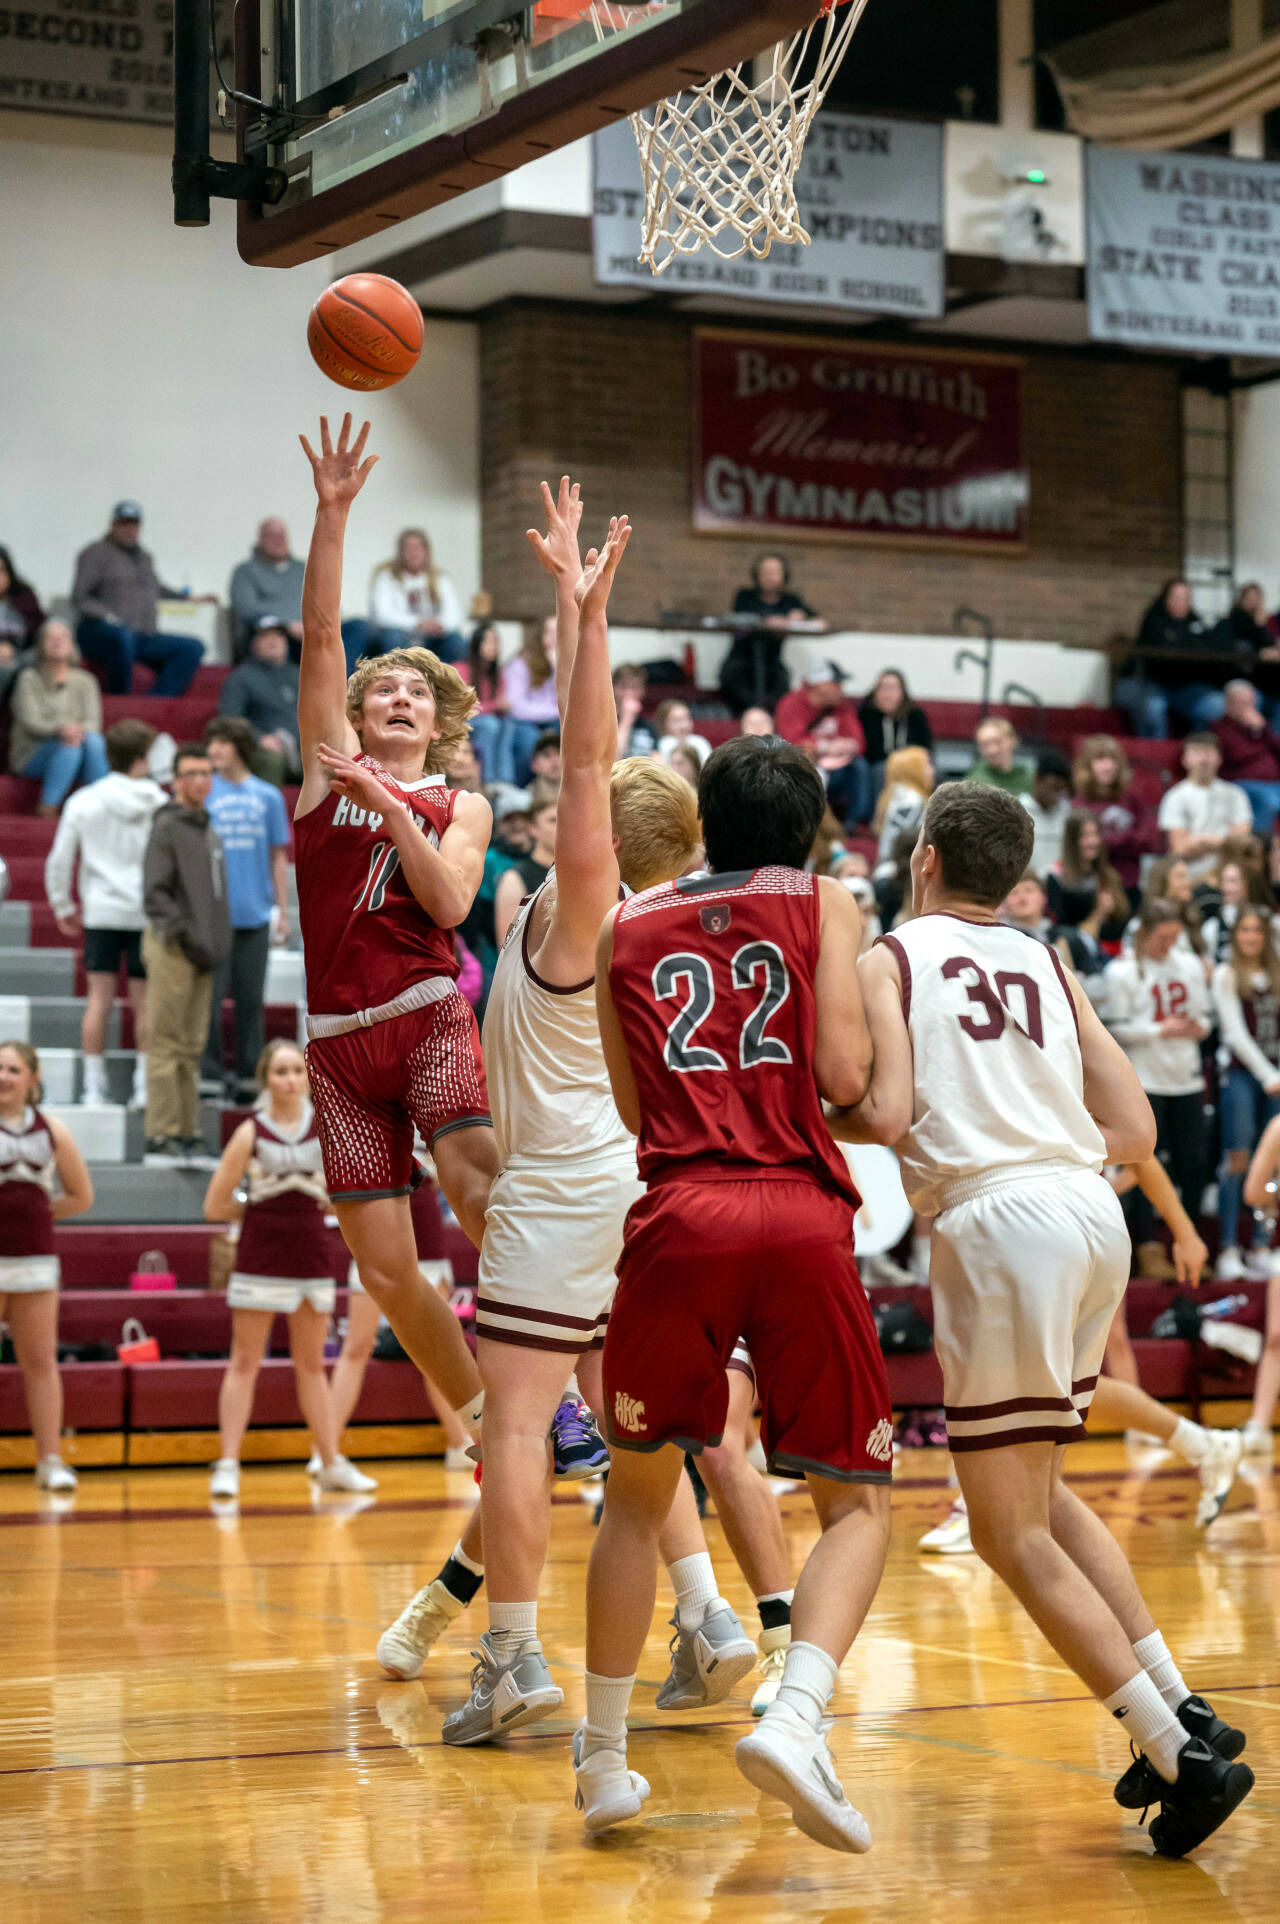 PHOTO BY FOREST WORGUM Hoquiam’s Zander Jumps, left, shoots during the Grizzlies’ 54-28 win over Montesano on Thursday in Montesano.